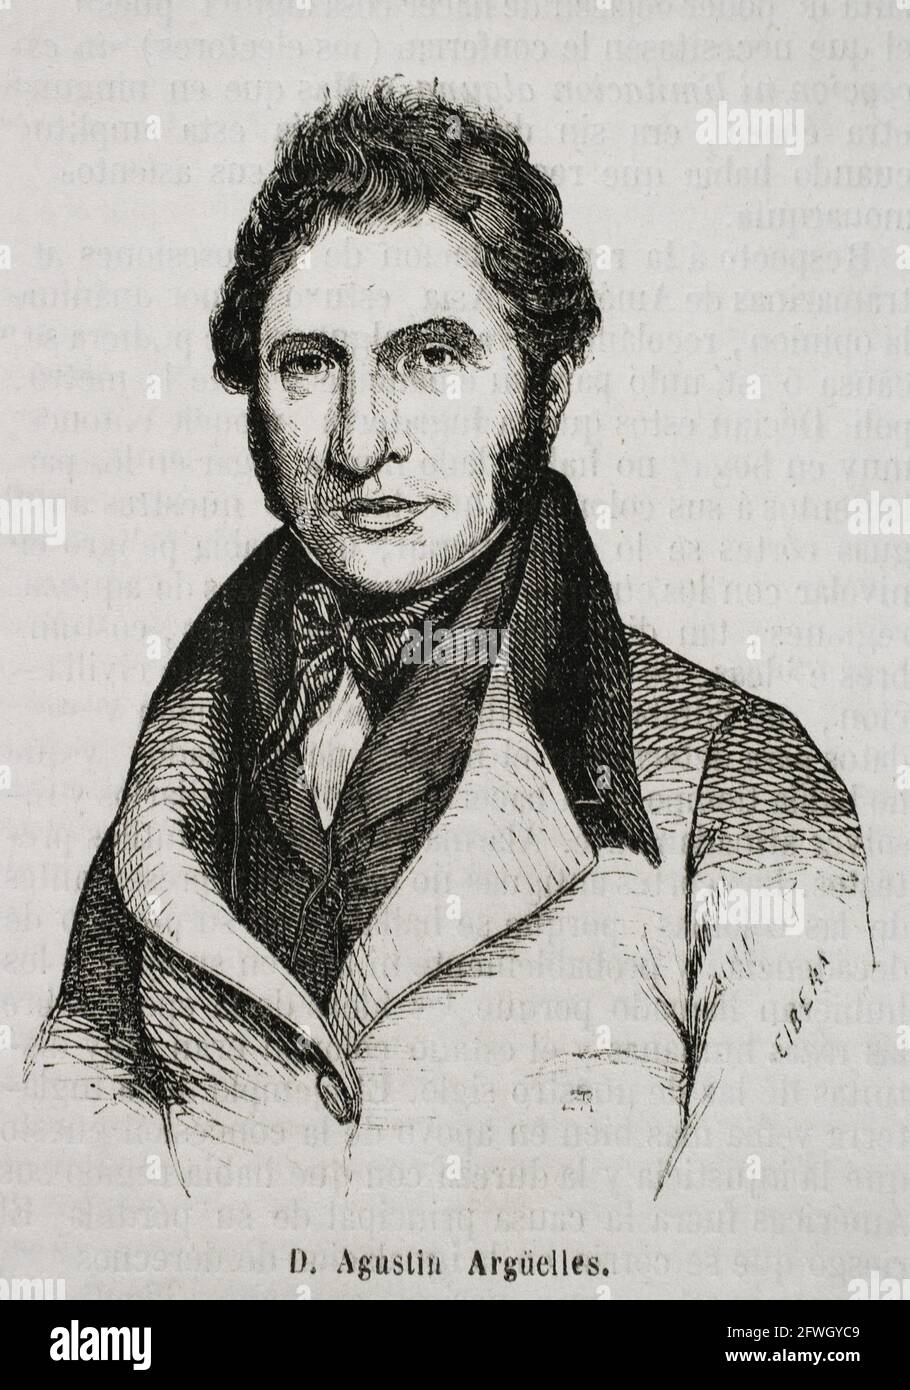 Agustín José Argüelles Alvarez (1776-1844). Known as 'El Divino'. Spanish liberal politician, diplomat, minister and president of the Congress of Deputies in 1841. He was tutor to Queen Isabella II. Portrait. Engraving by Cibera. Historia General de España by Father Mariana. Madrid, 1853. Stock Photo